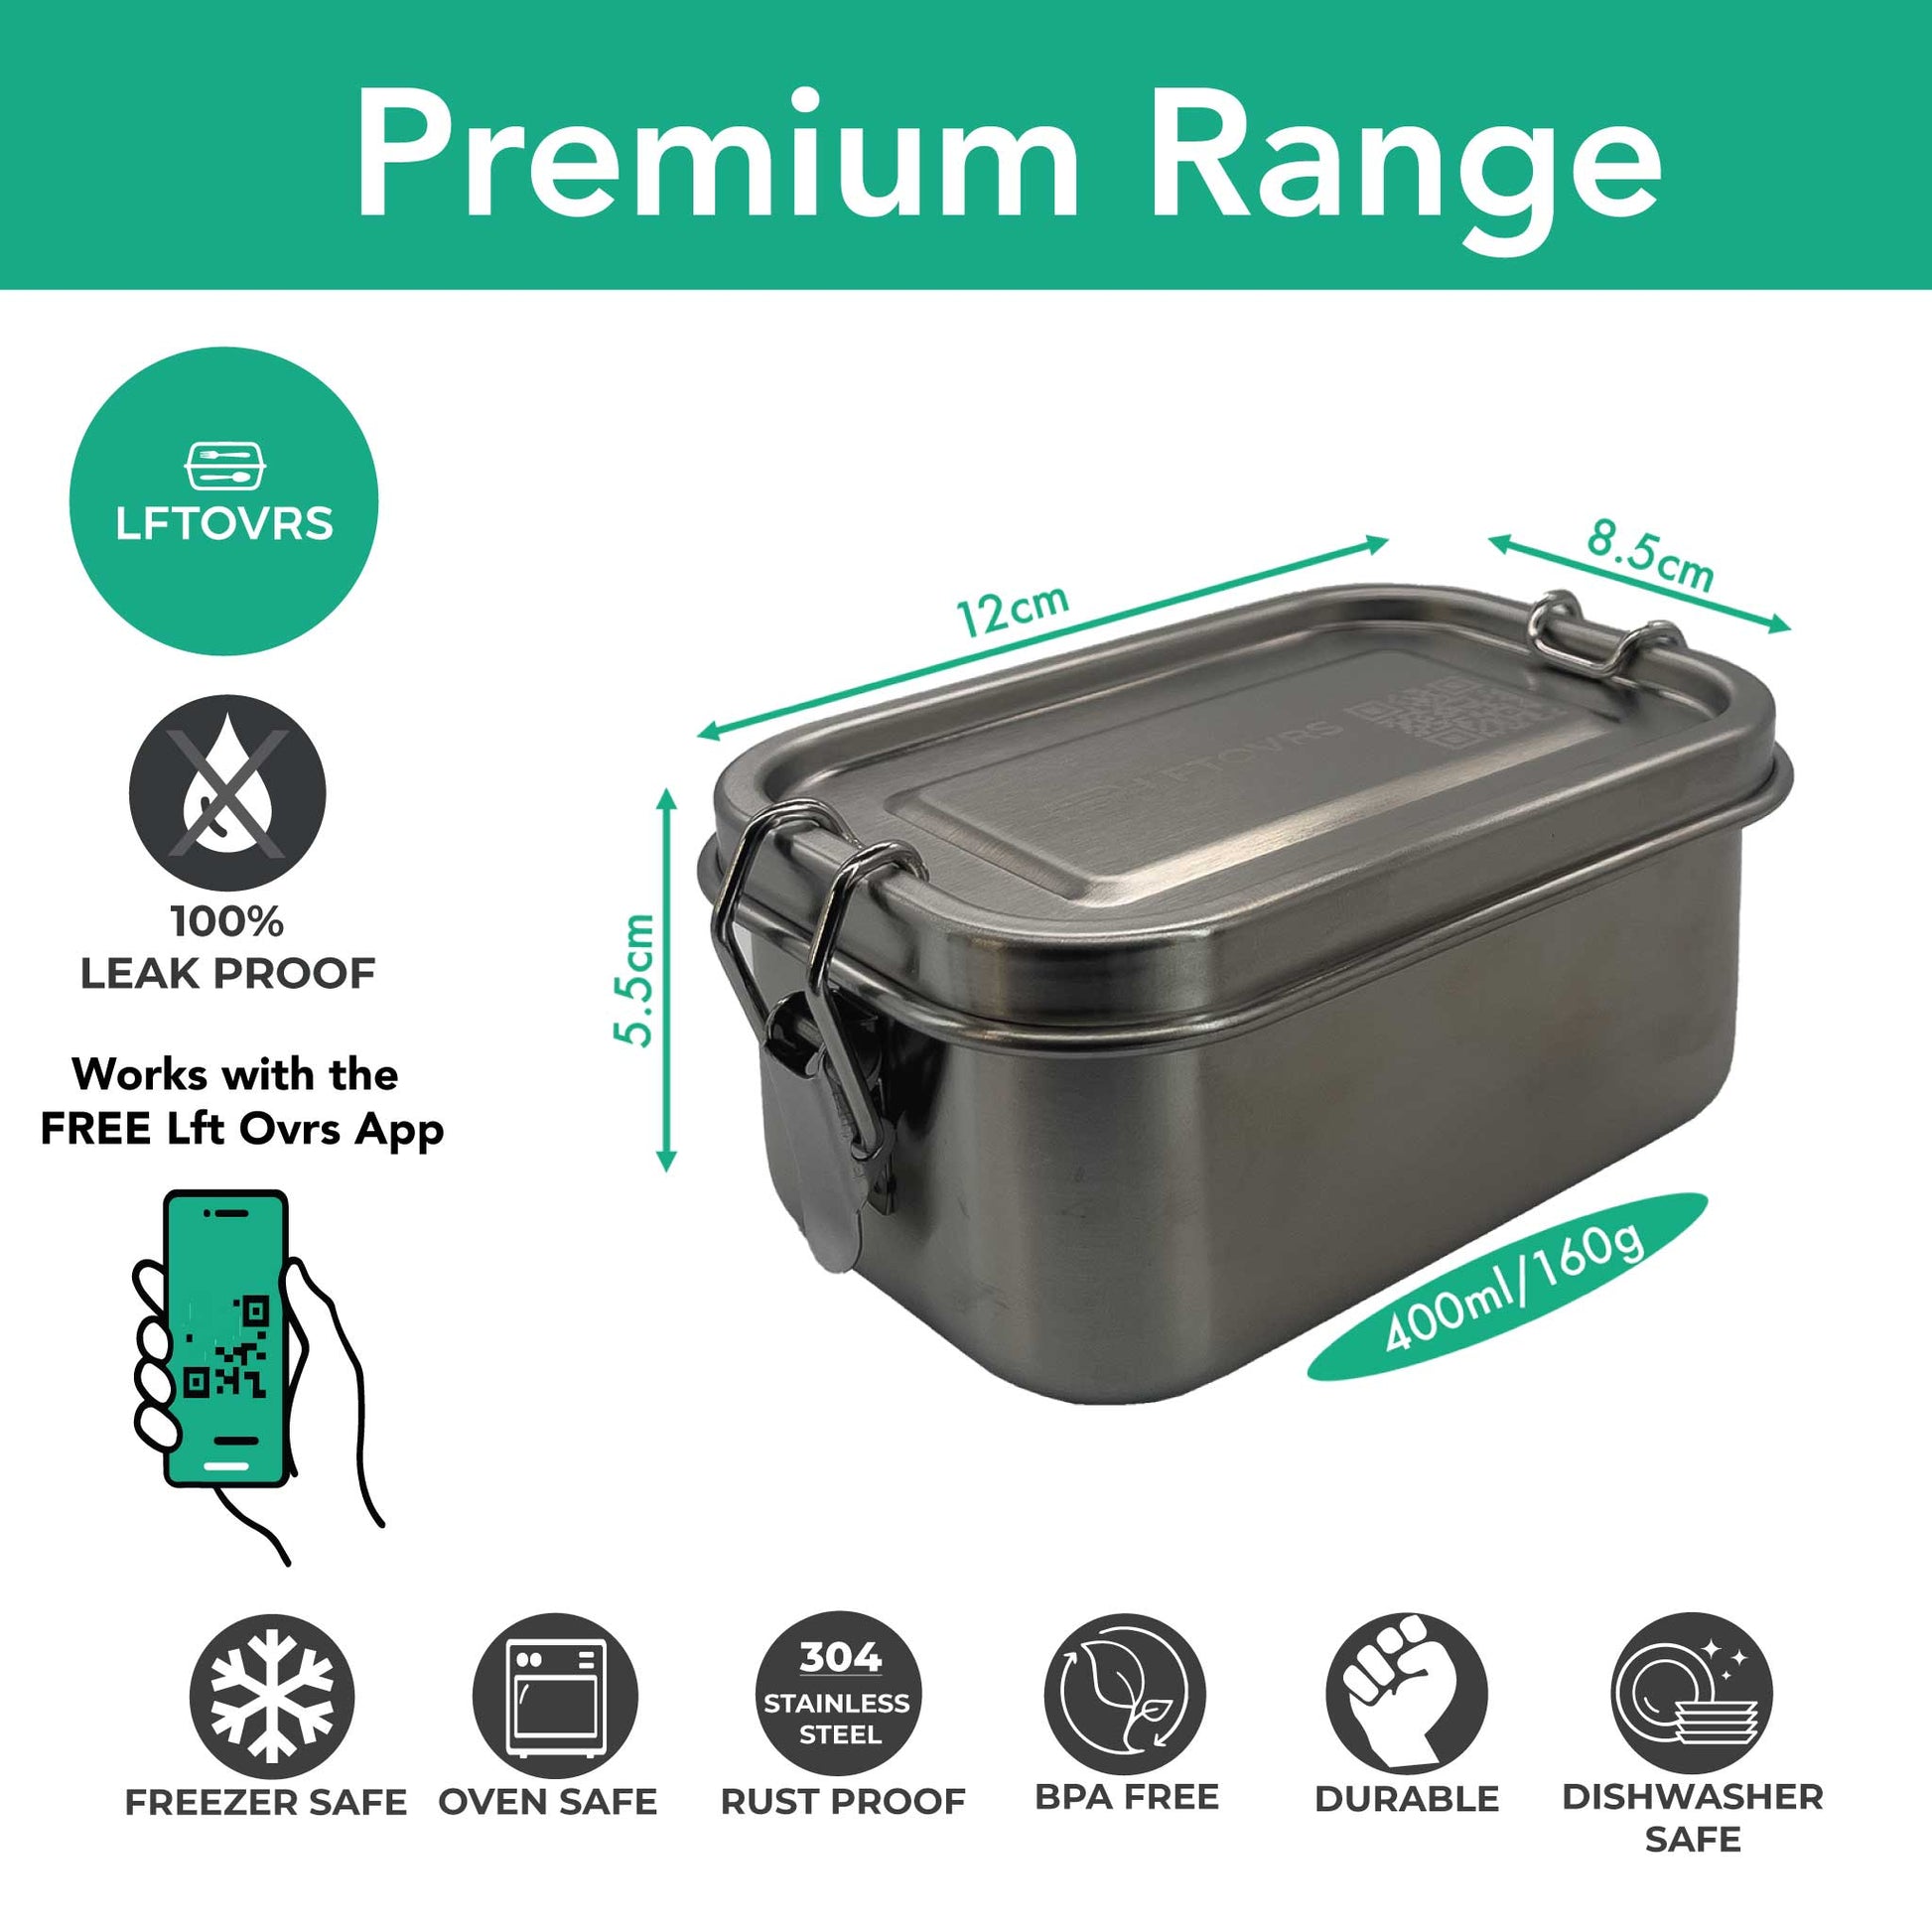 400ml premium stainless steel lunchbox from lftovrs - features